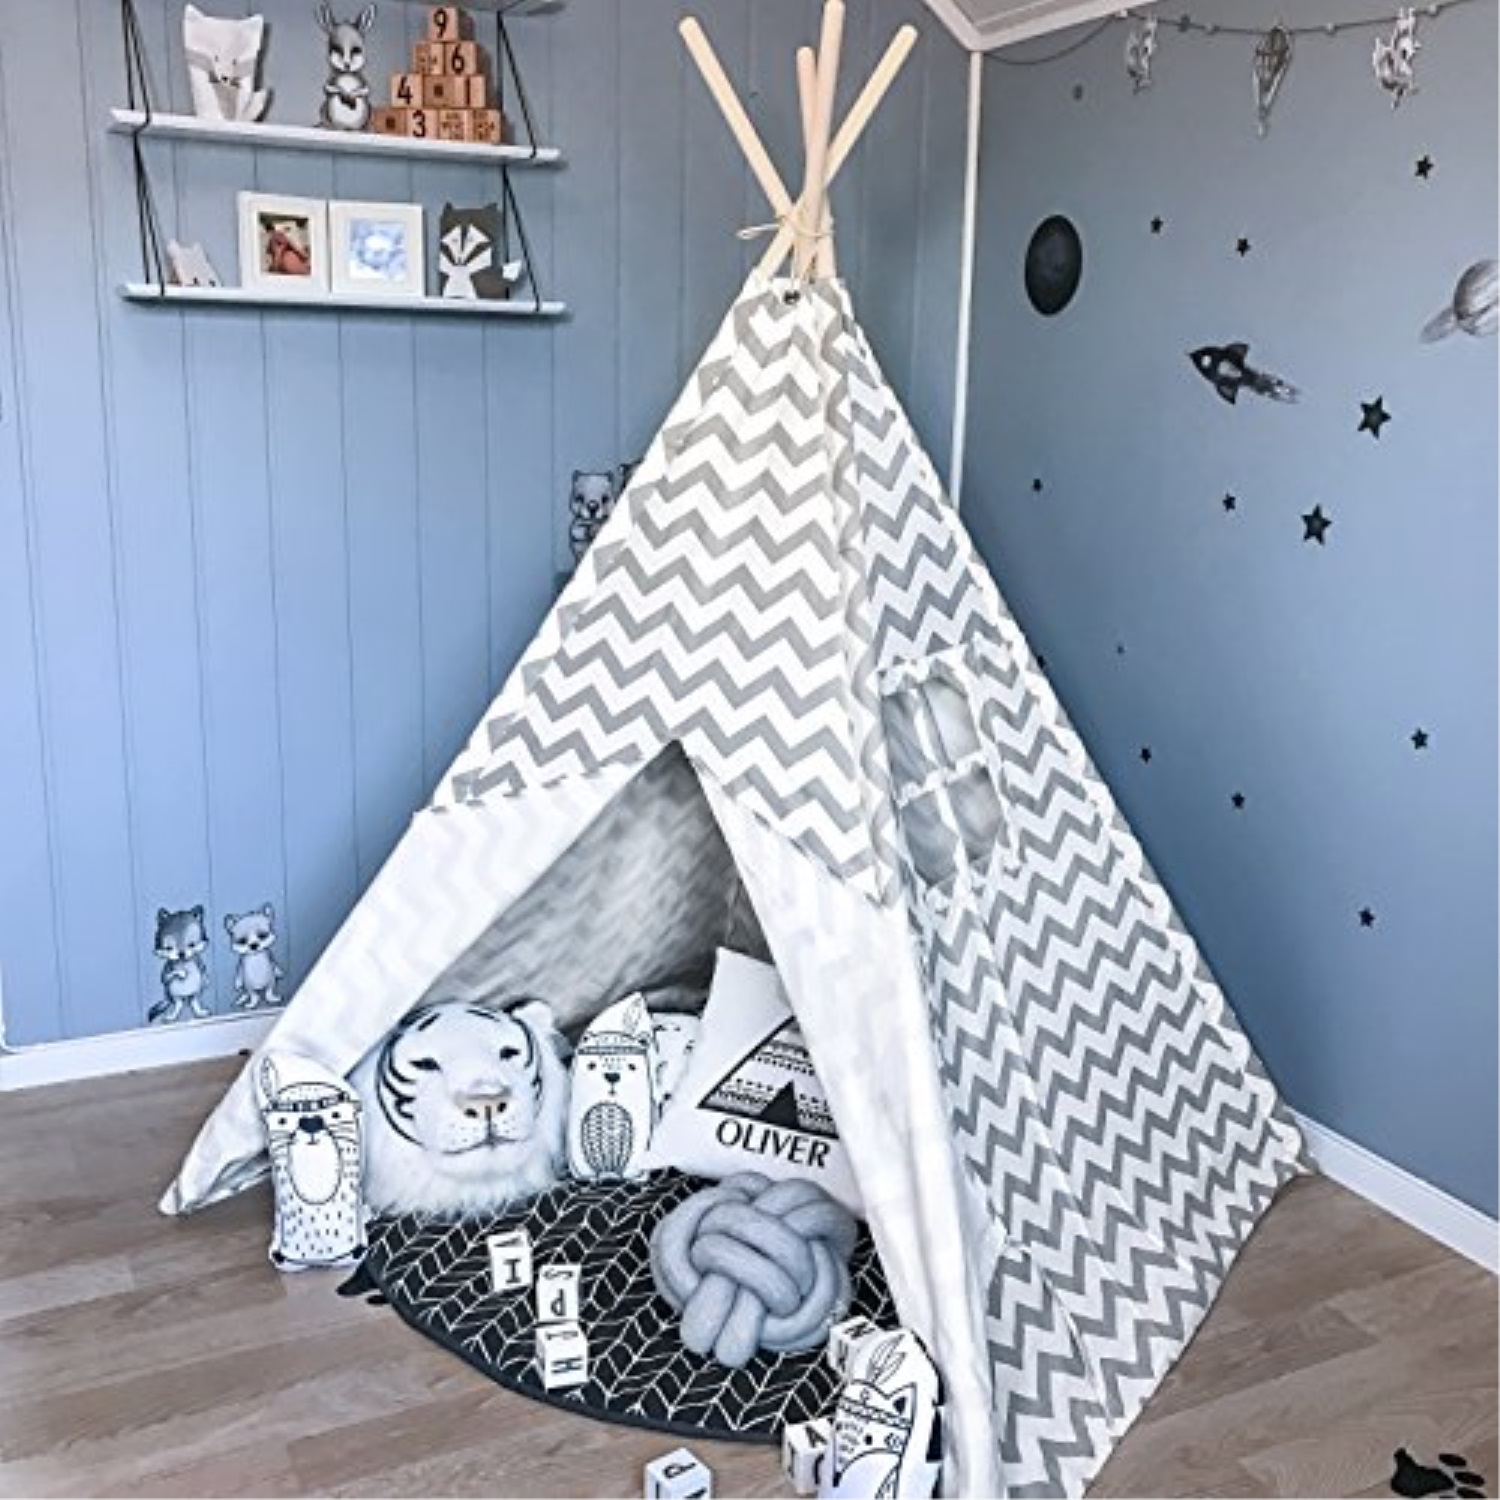 Tiny Land Teepee Tent Kids, Children Play Tent Indoor and Outdoor, 5' Gray Chevron Cotton Canvas Teepee